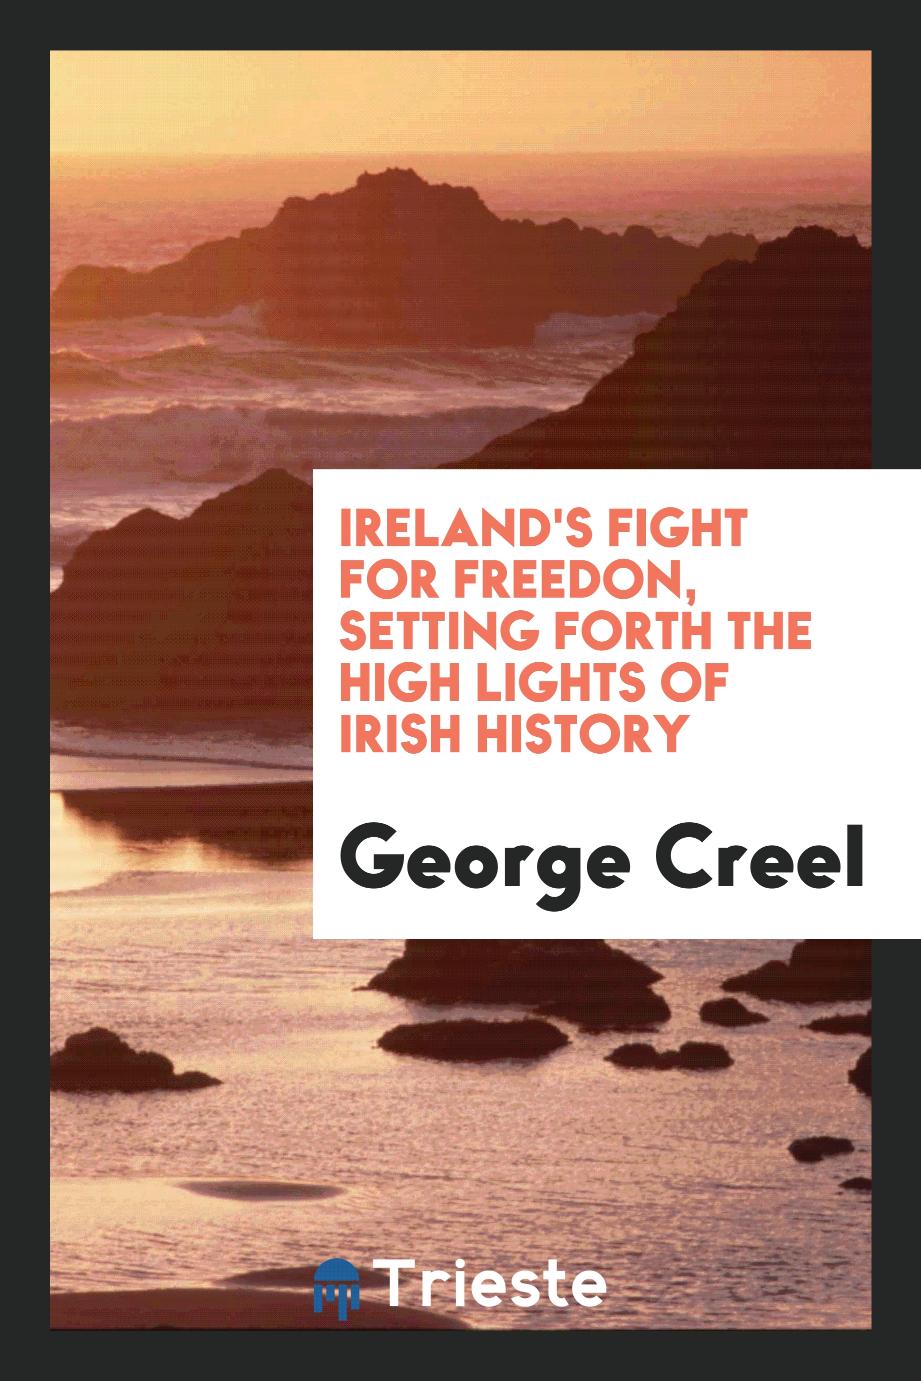 Ireland's fight for freedon, setting forth the high lights of Irish history